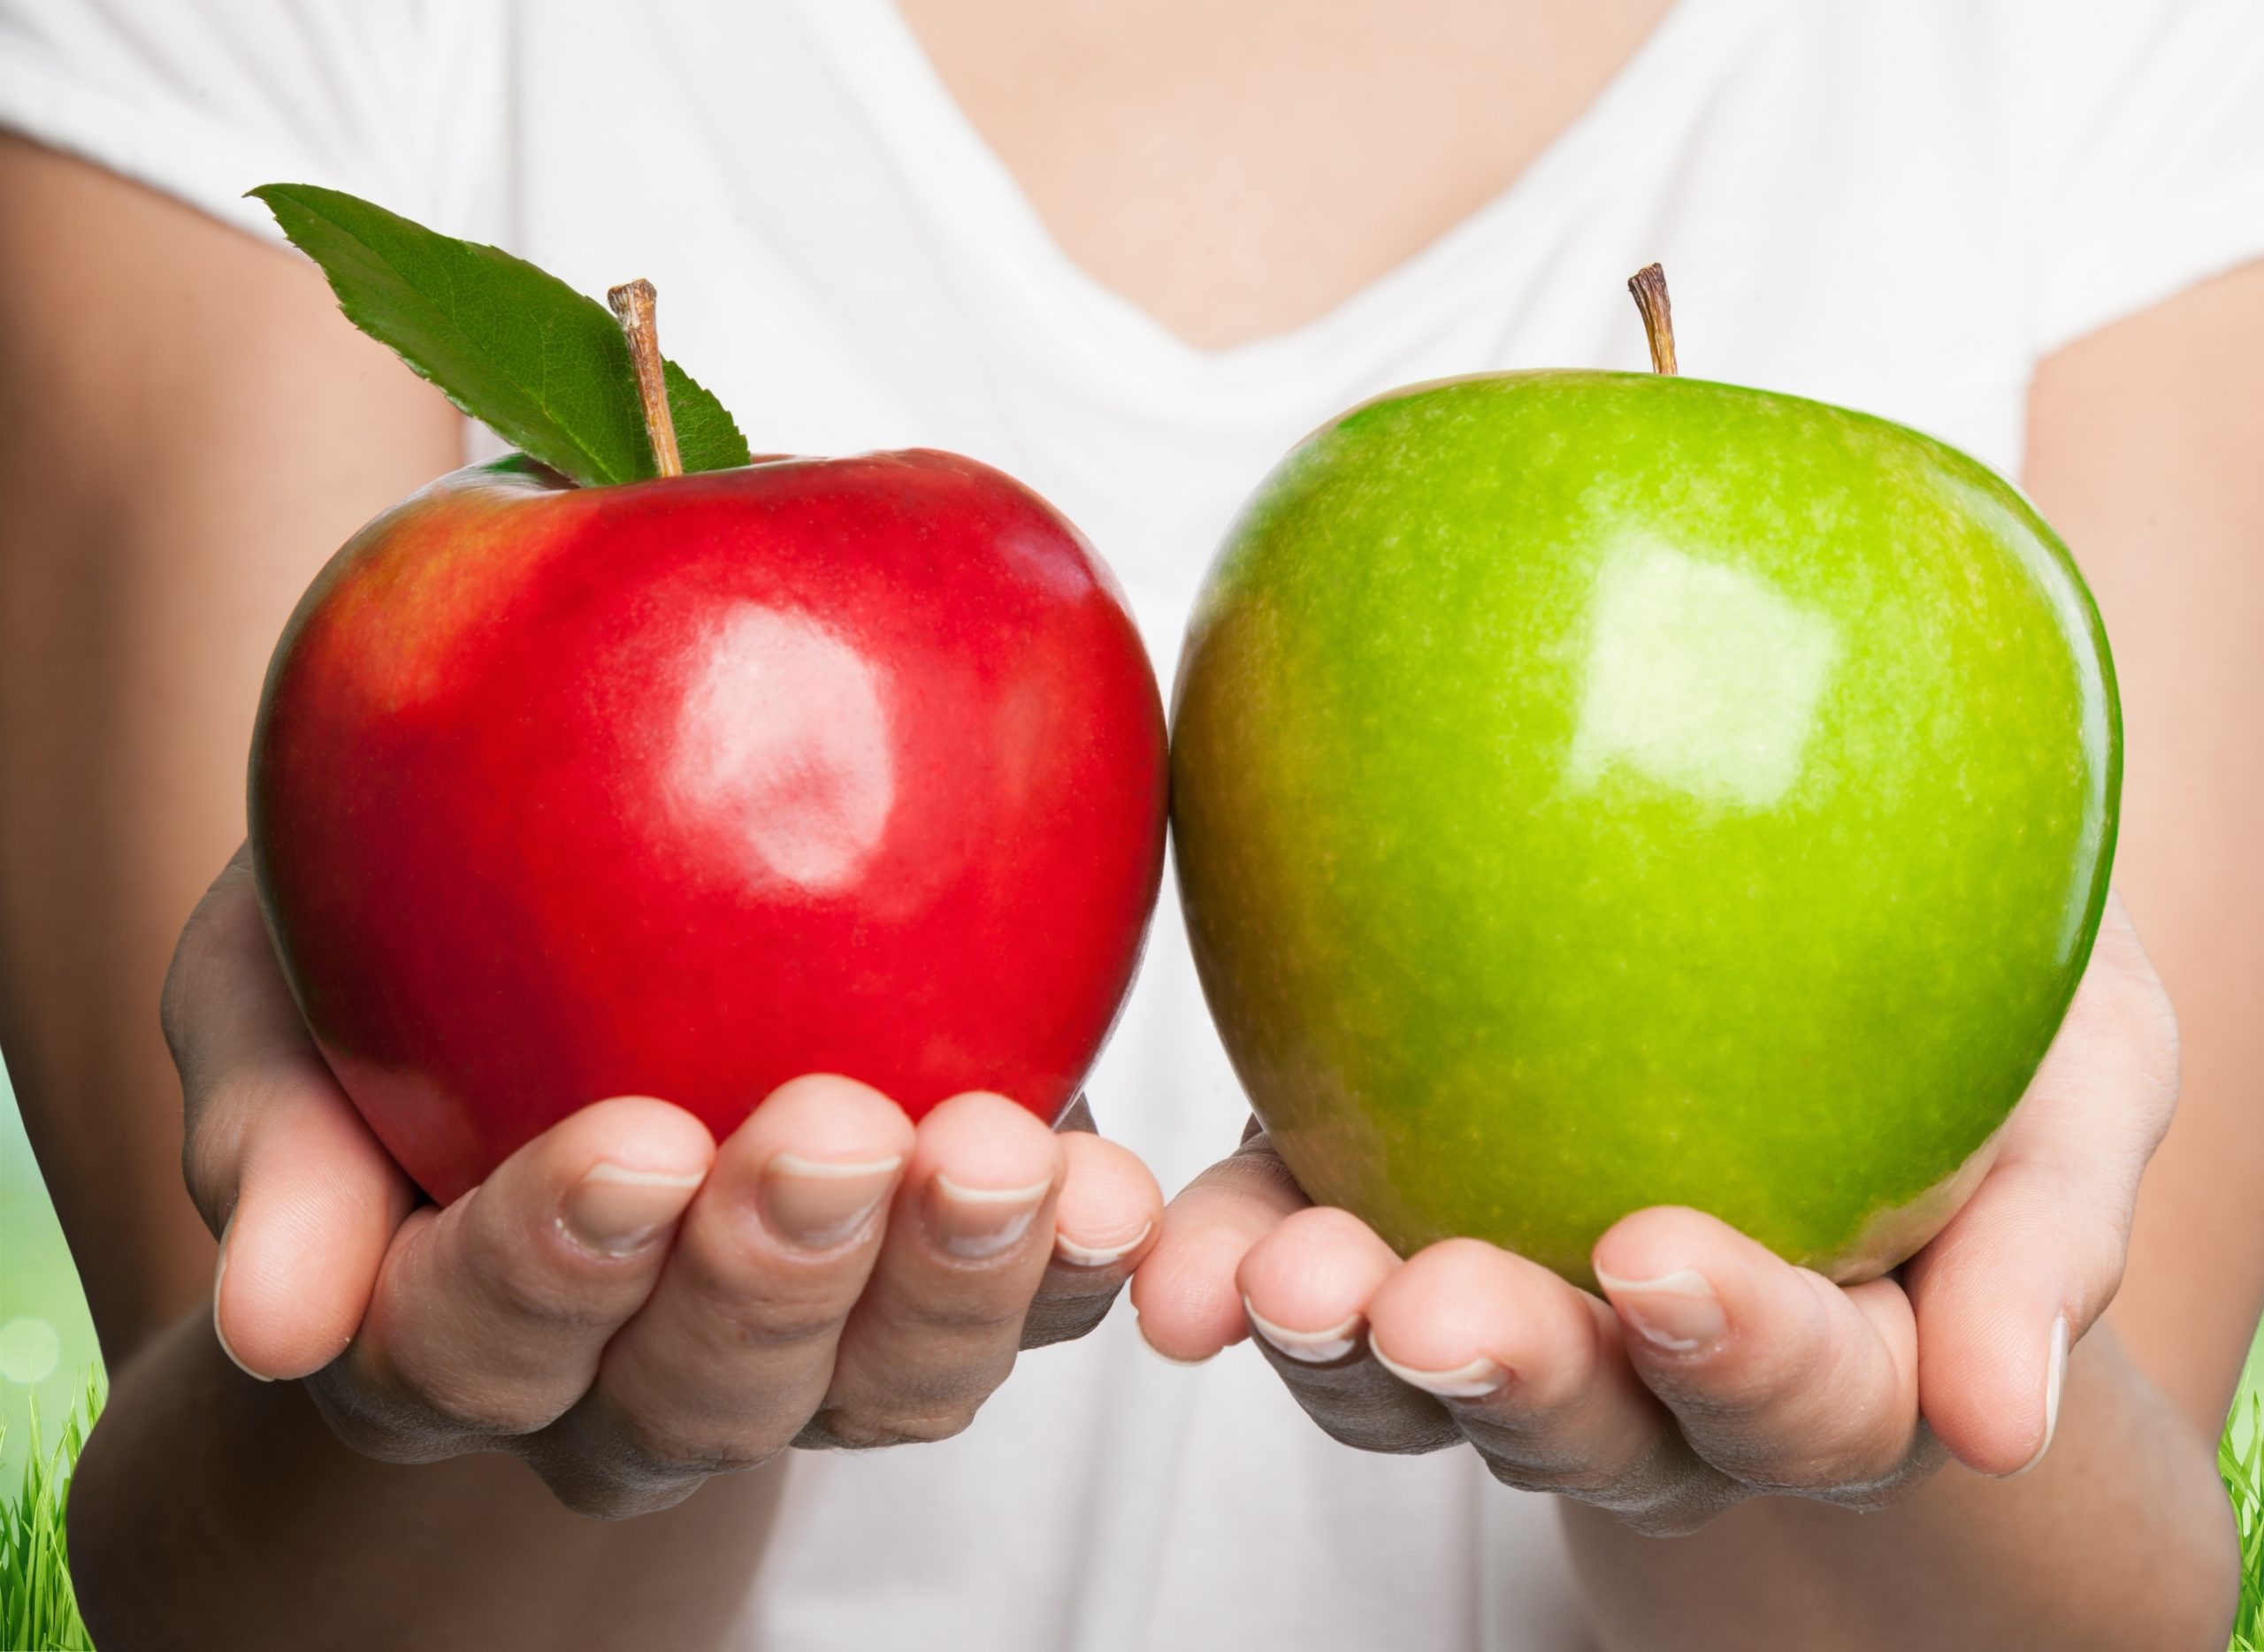 two hands, one holding a red apple and one holding a green apple